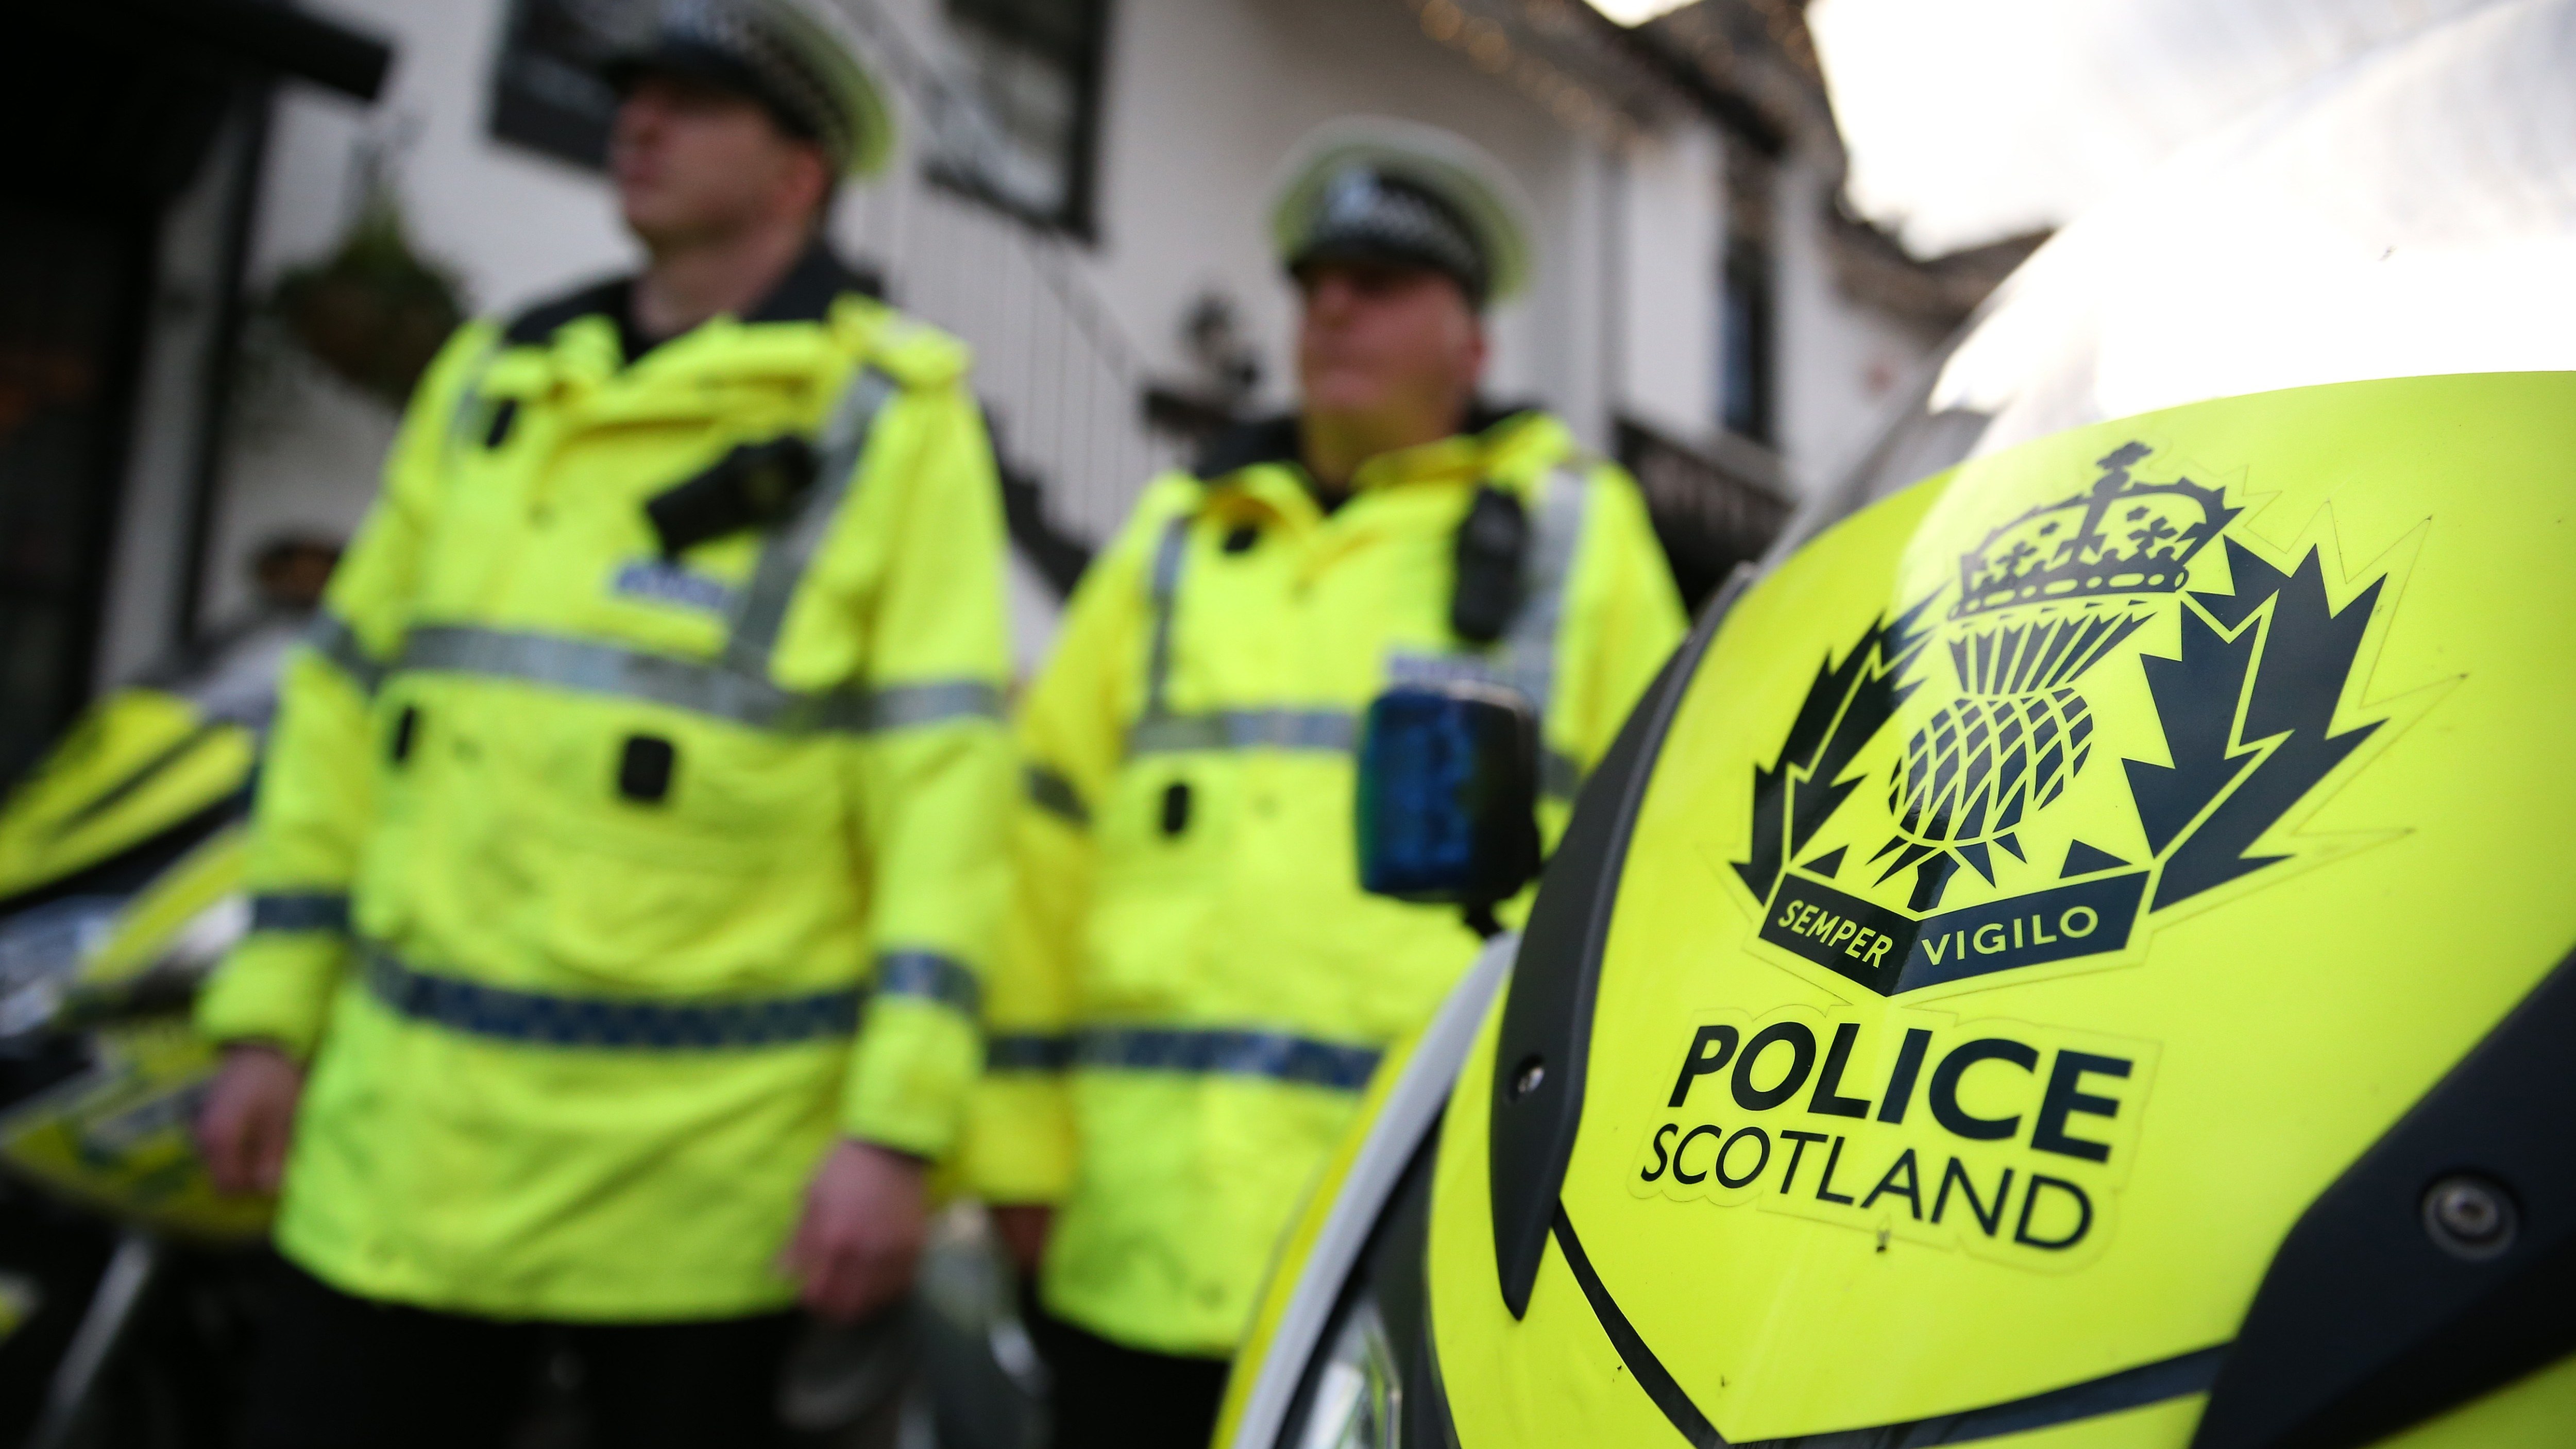 Investigating the most serious crimes will be made “harder” by the expected wave of hate crime complaints, according to the president of the Association of Scottish Police Superintendents